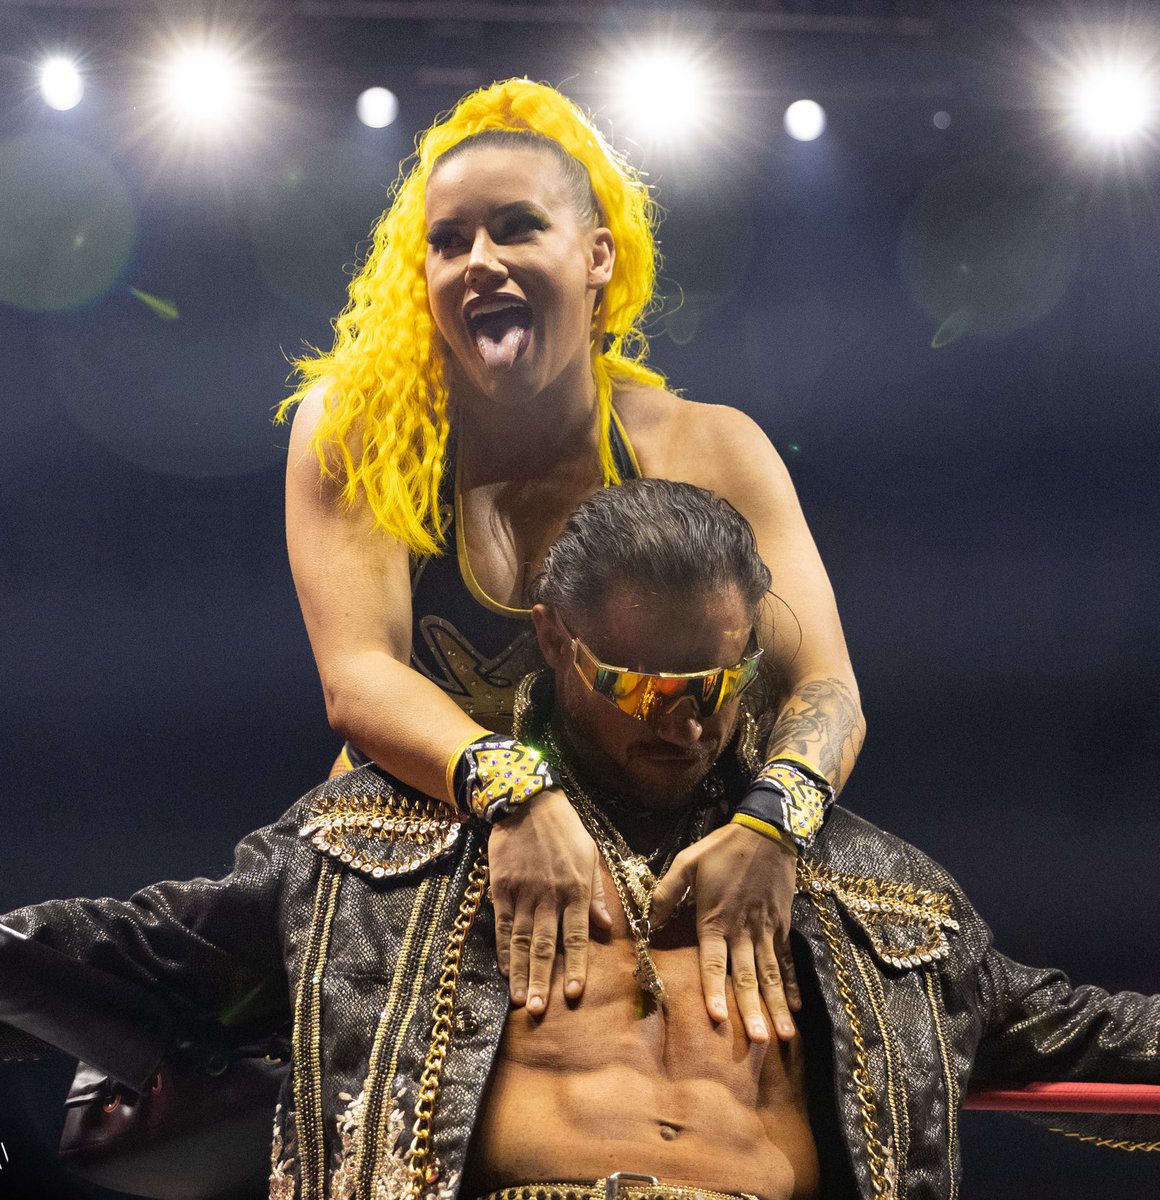 ✨ Johnny Loves Taya, first episode drop’s tomorrow on the @AEW YouTube channel!!!! Let the mayhem, the laughter and the ridiculousness begin! #JohnnyLovesTaya